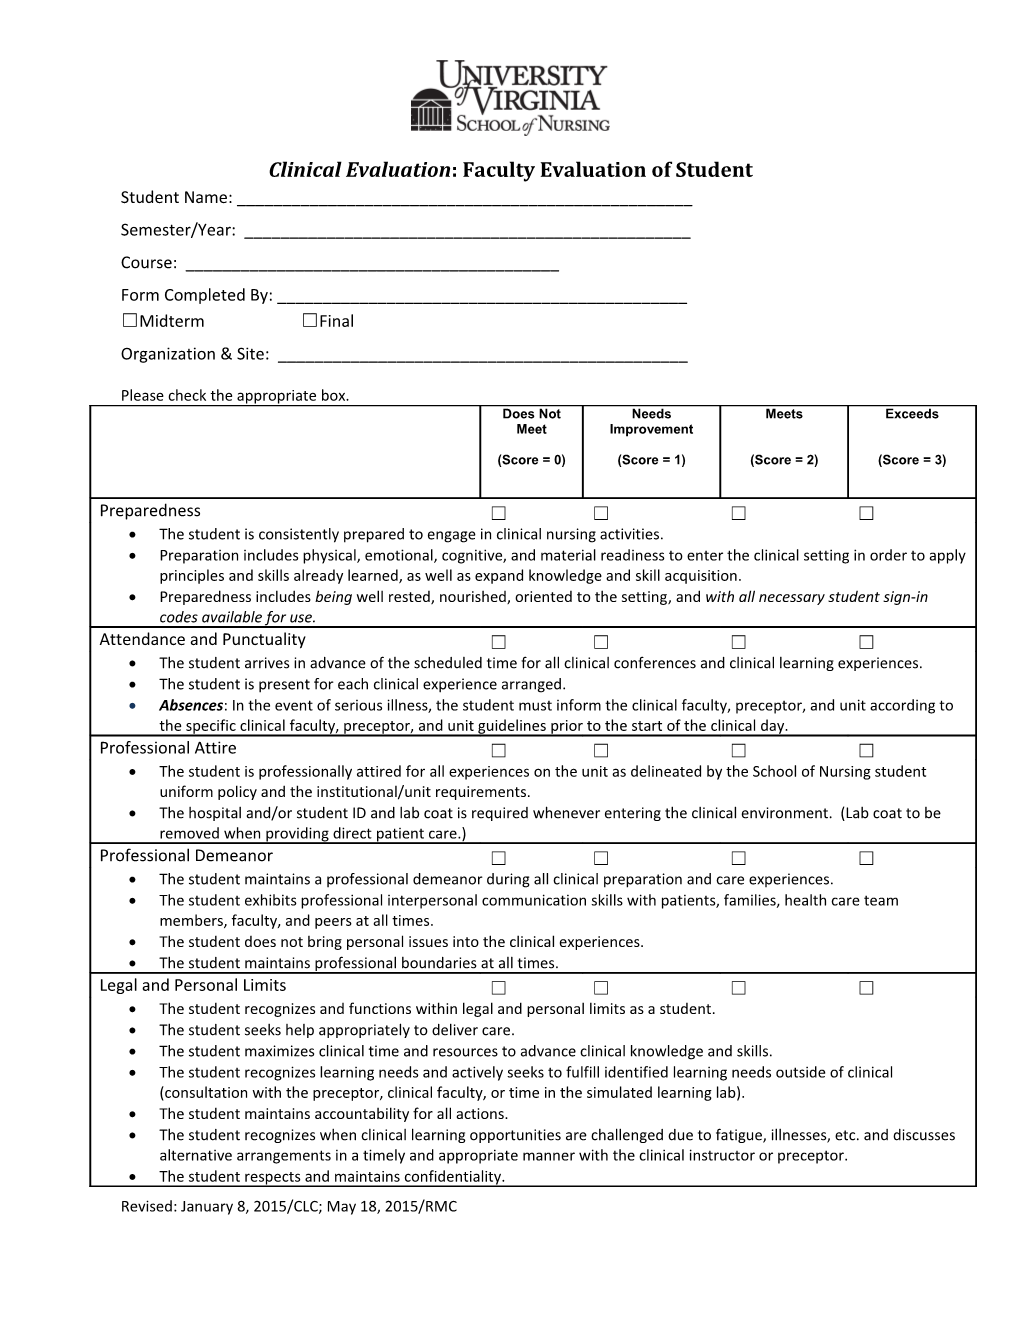 Clinical Evaluation: Faculty Evaluation of Student